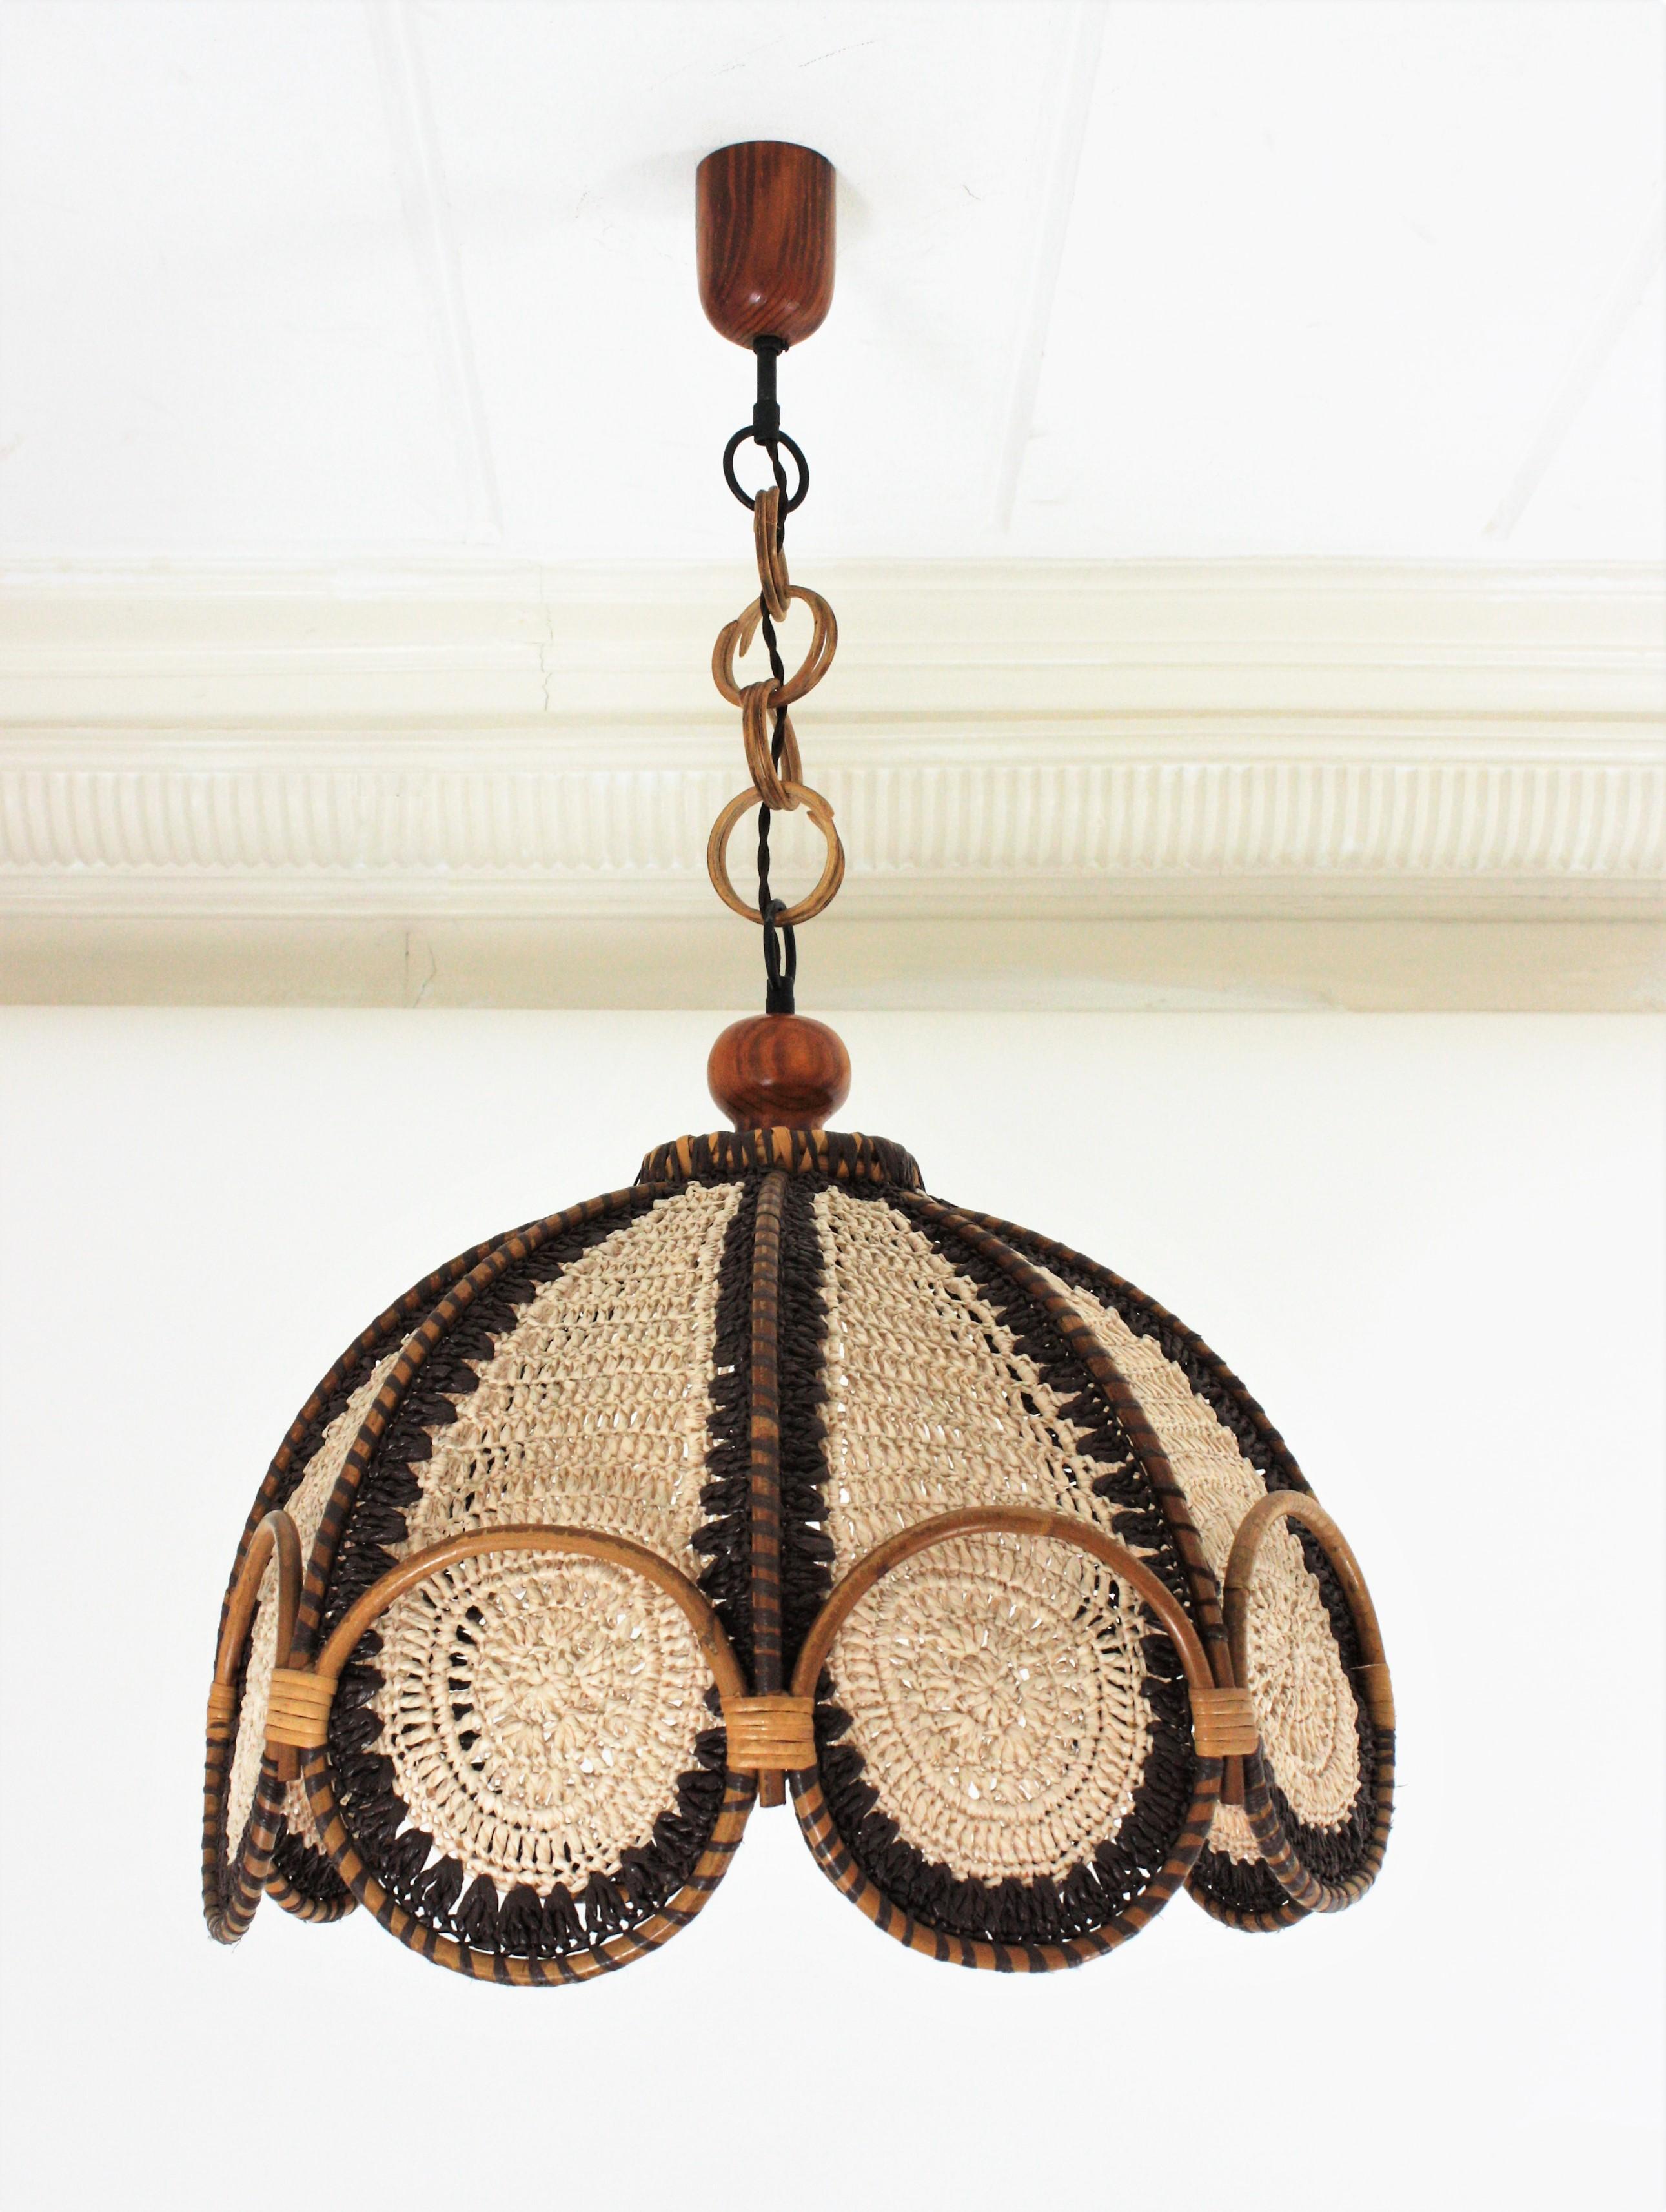 Spanish Modernist Beige Brown Macramé Large Pendant Lamp with Rattan Rings In Good Condition For Sale In Barcelona, ES